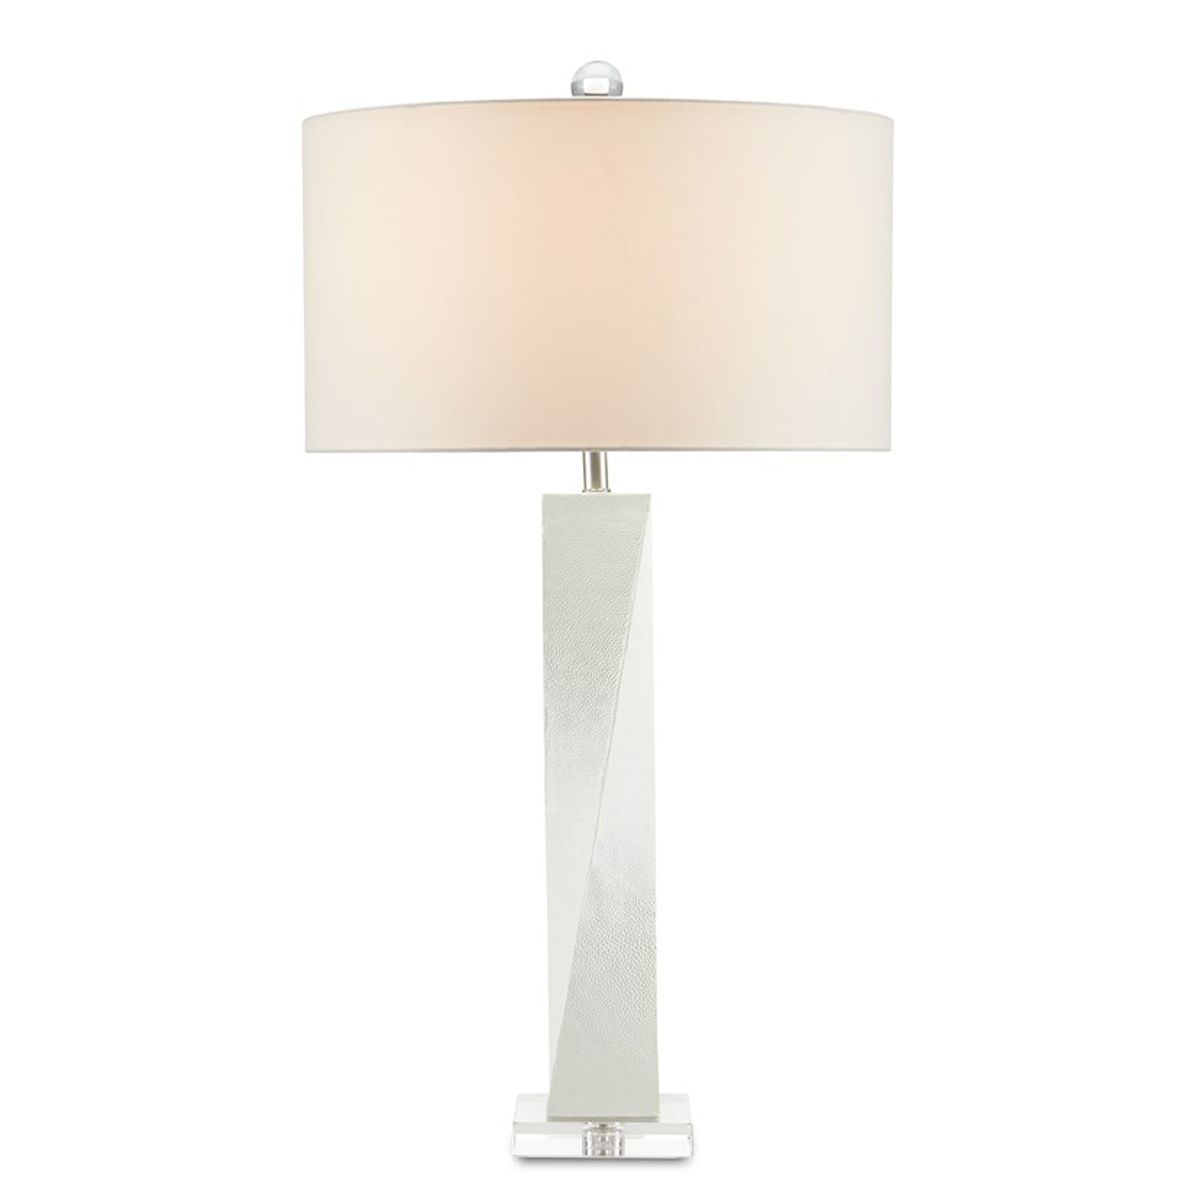 Picture of CHATTO WHITE LAMP